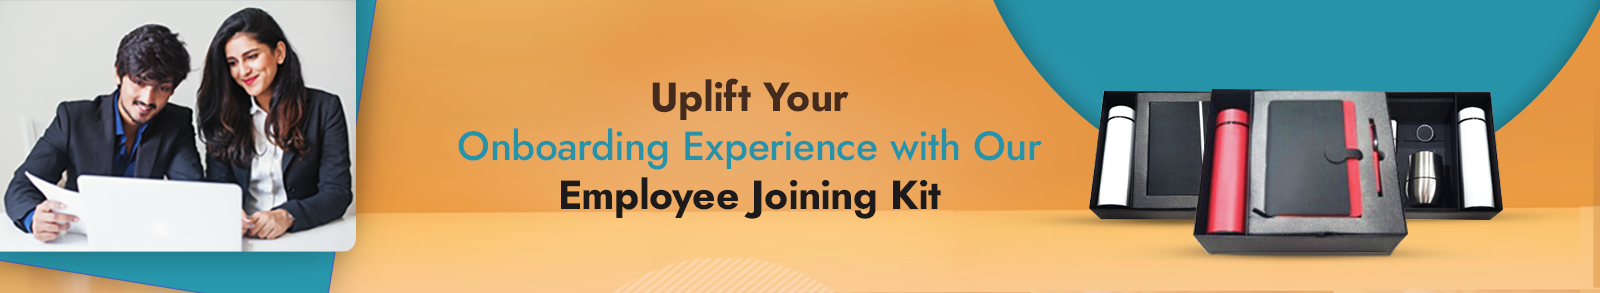 Uplift Your Onboarding Experience with Our Employee Joining Kit_1600